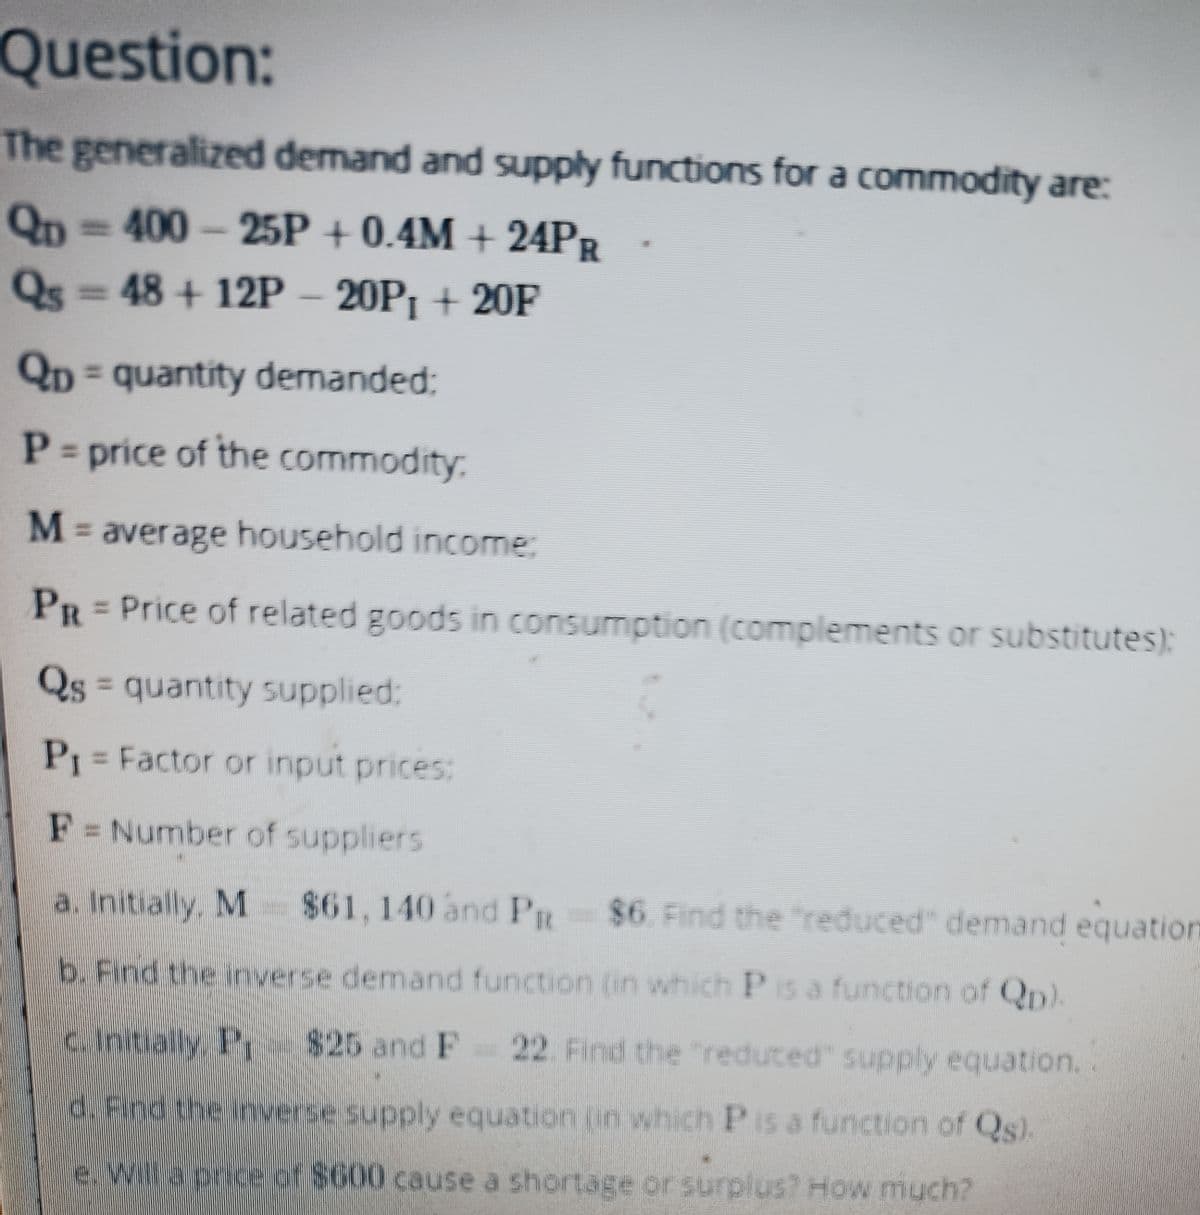 Question:
The generalized demand and supply functions for a commodity are:
QD=400-25P
+ 0.4M+24PR
Qs=48+12P
20P₁+ 20F
QD = quantity demanded:
P
= price of the commodity:
M =
= average household income:
PR= Price of related goods in consumption (complements or substitutes):
Qs = quantity supplied:
P₁ = Factor or input prices:
F = Number of suppliers
a. Initially. M $61, 140 and PR $6. Find the "reduced" demand equation
b. Find the inverse demand function (in which P is a function of Qp).
c. Initially. Pr $25 and F 22. Find the "reduced" supply equation..
d. Find the inverse supply equation in which P is a function of Qs).
e. Will a price of $600 cause a shortage or surplus? How much?